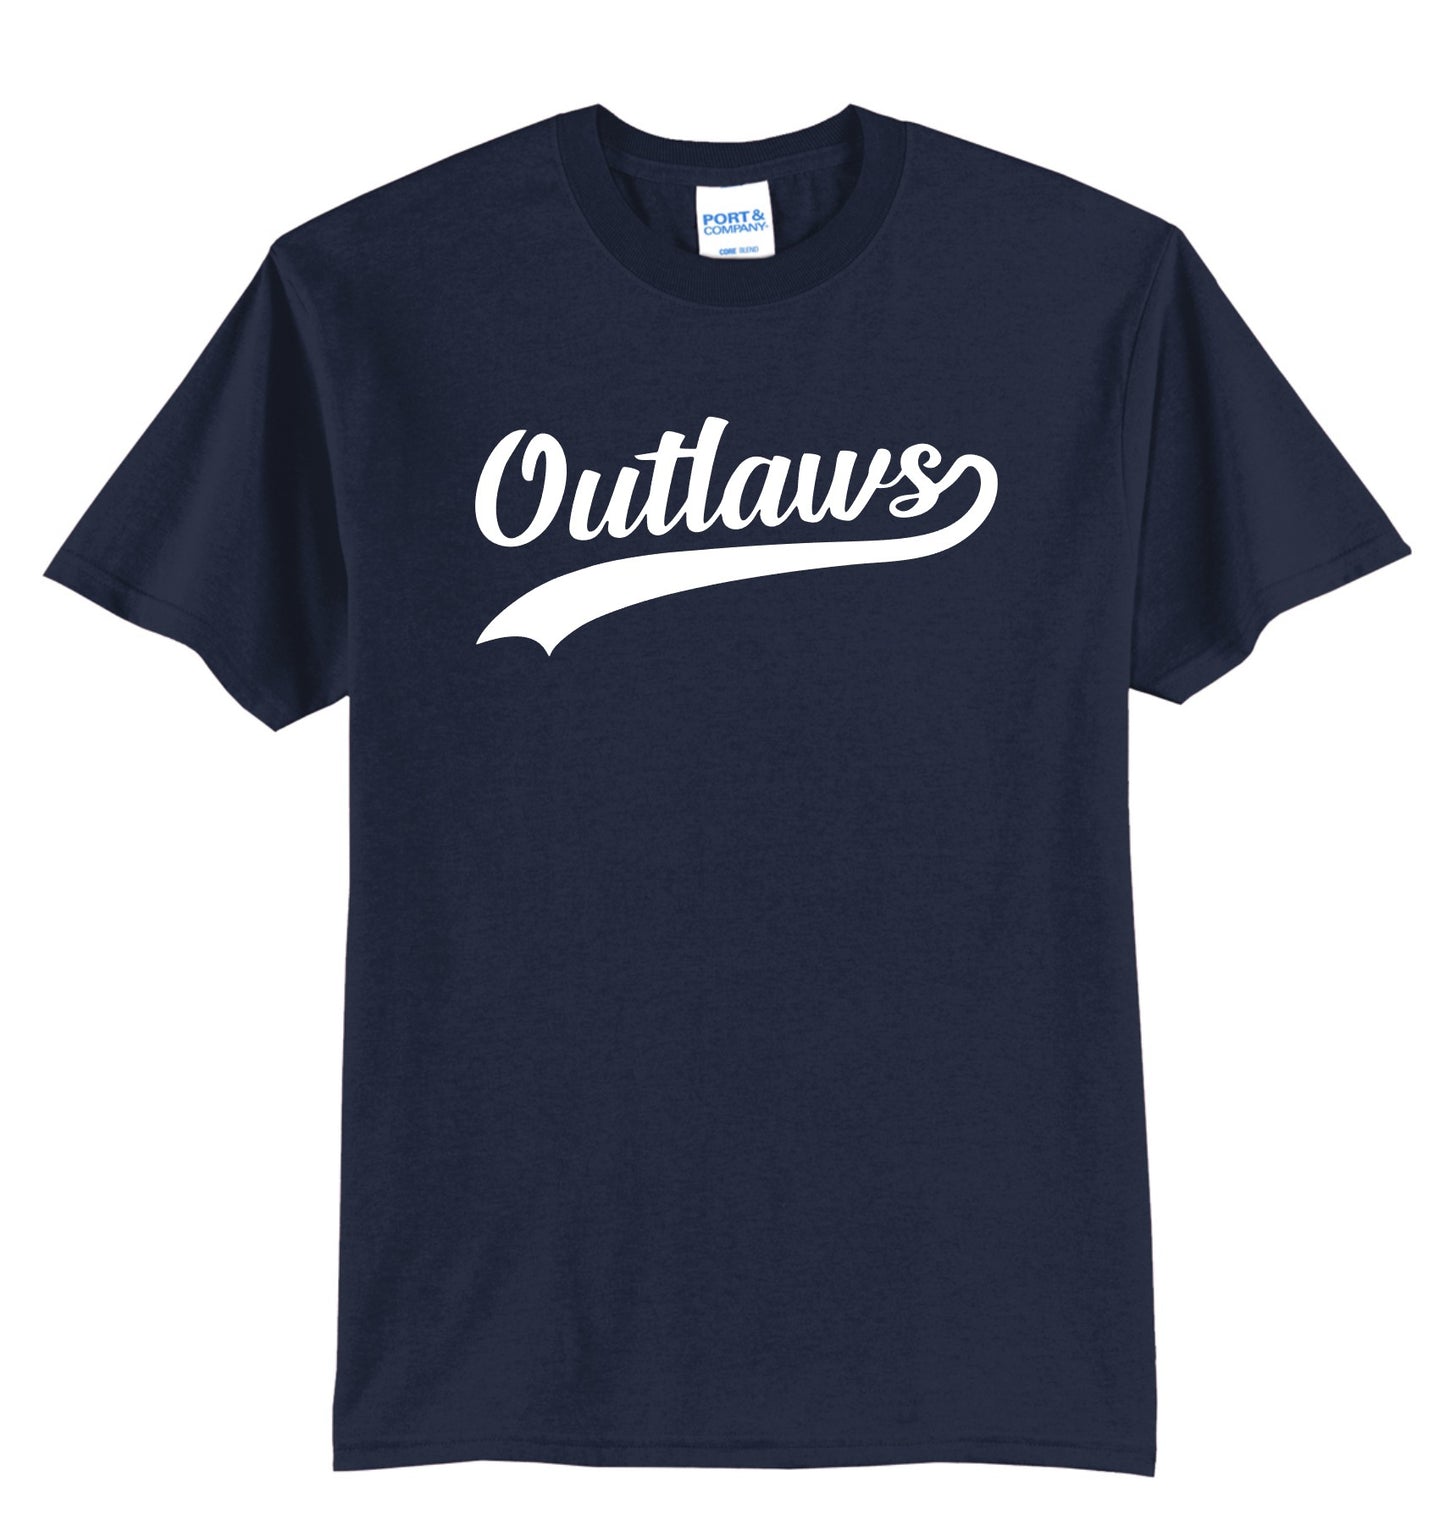 Outlaws Cotton Blend Tee